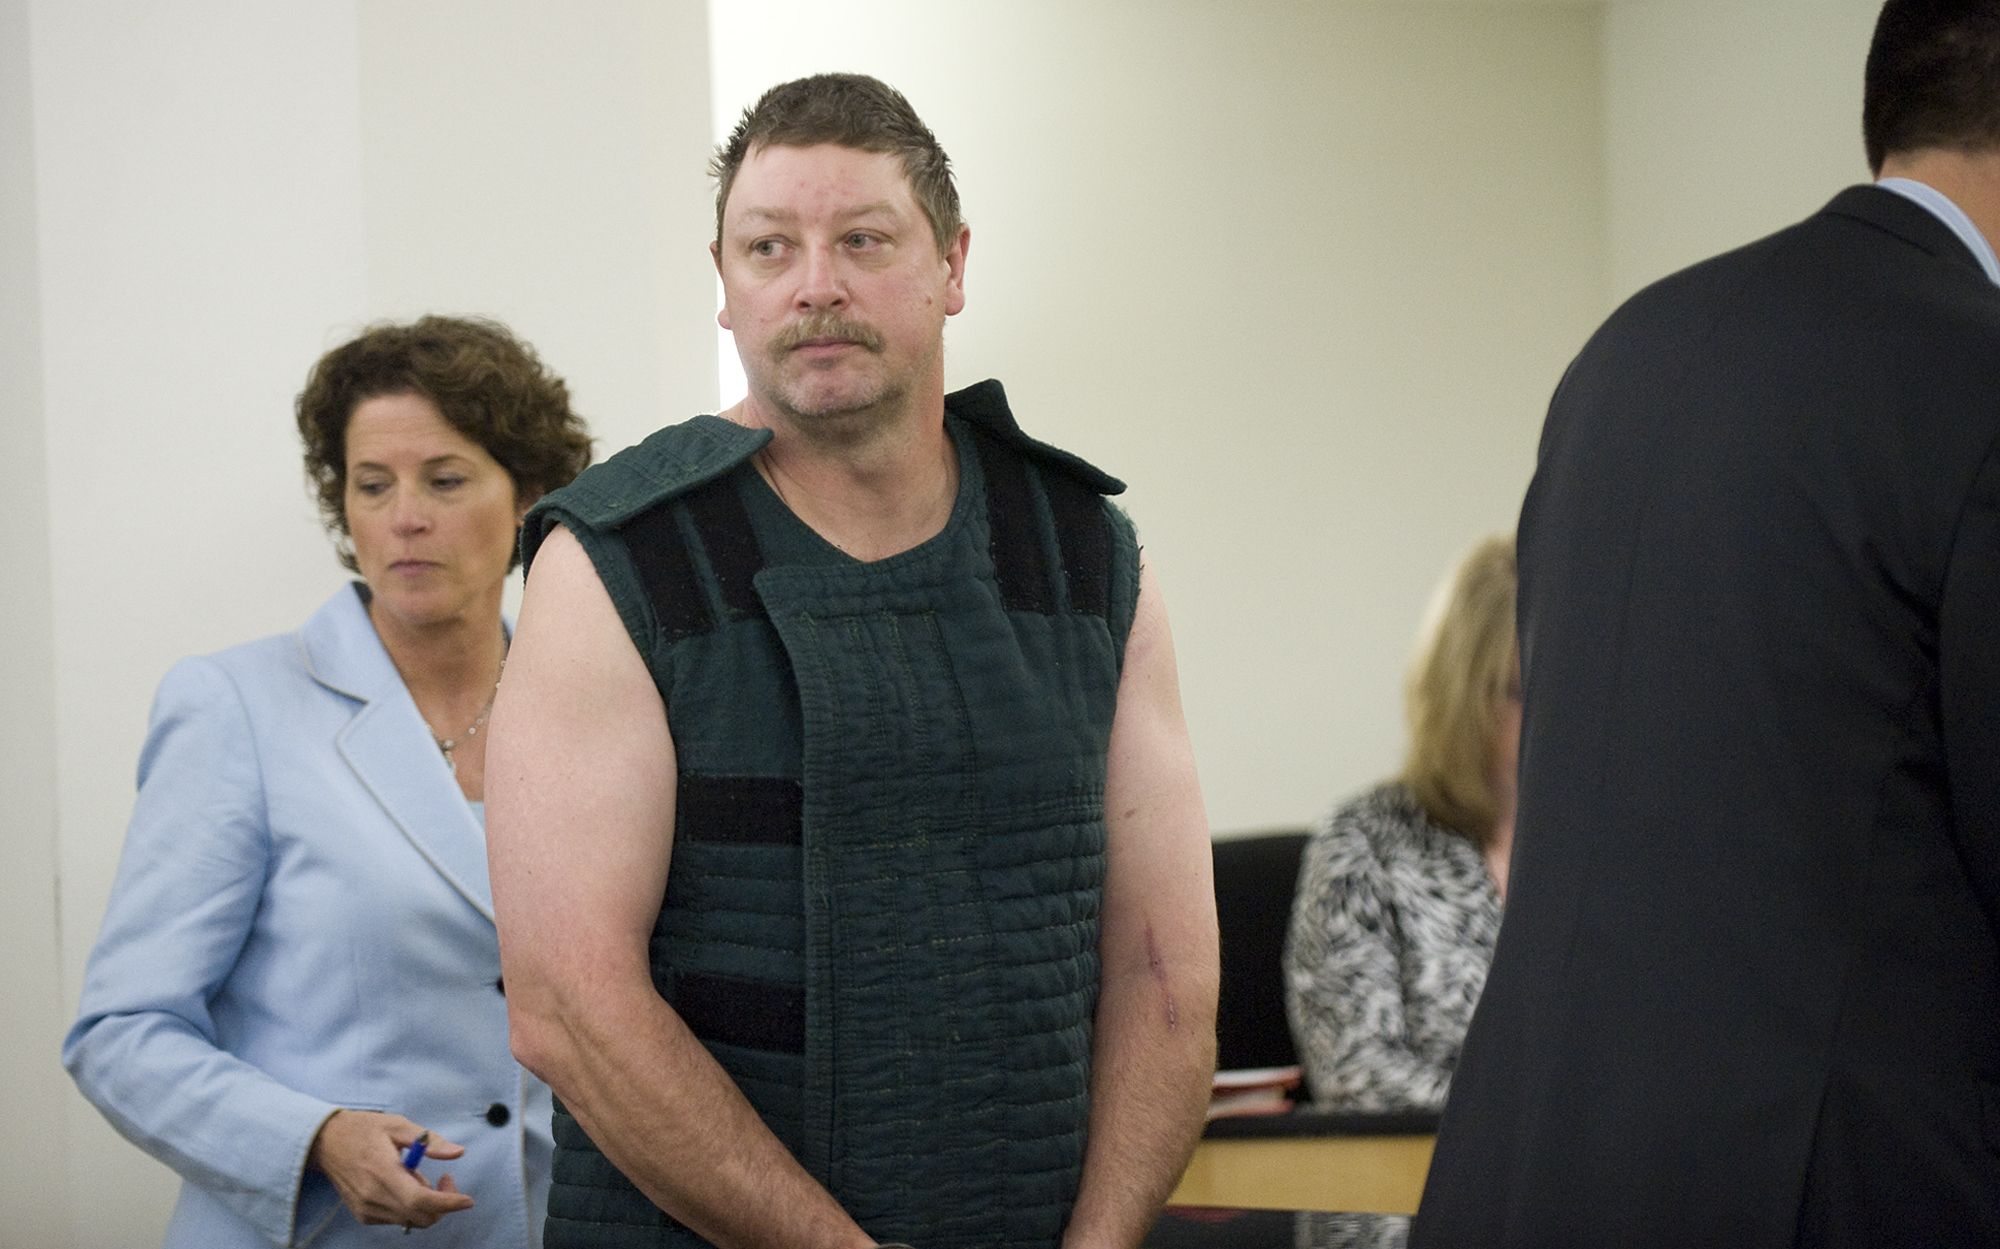 Dennis Wolter of Vancouver is pictured here with his defense attorney, Therese Lavallee, at his first appearance in May.